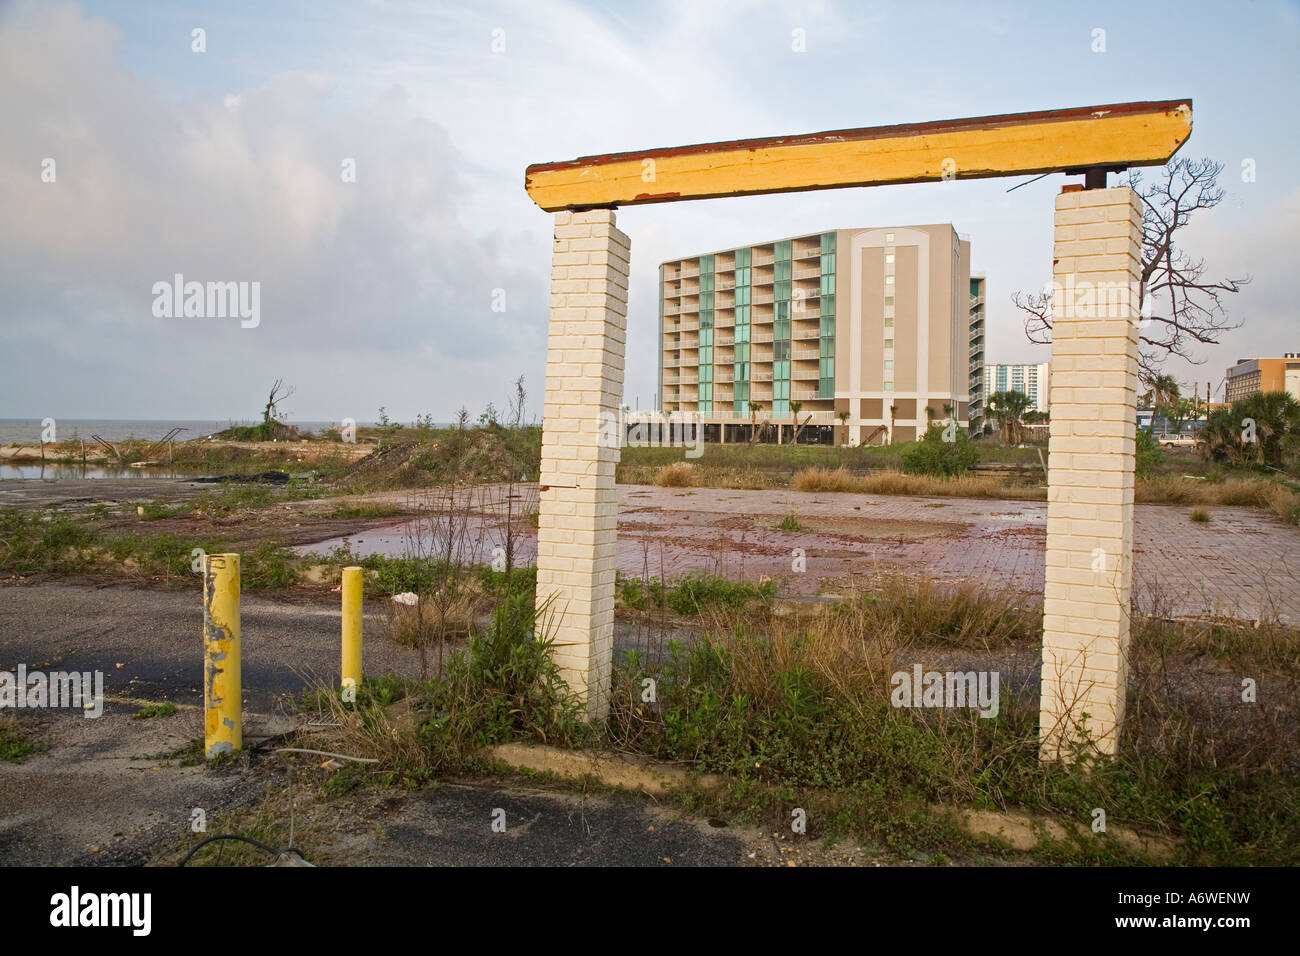 Luxury Condos Replace Small Homes and Businesses After Hurricane Katrina Stock Photo